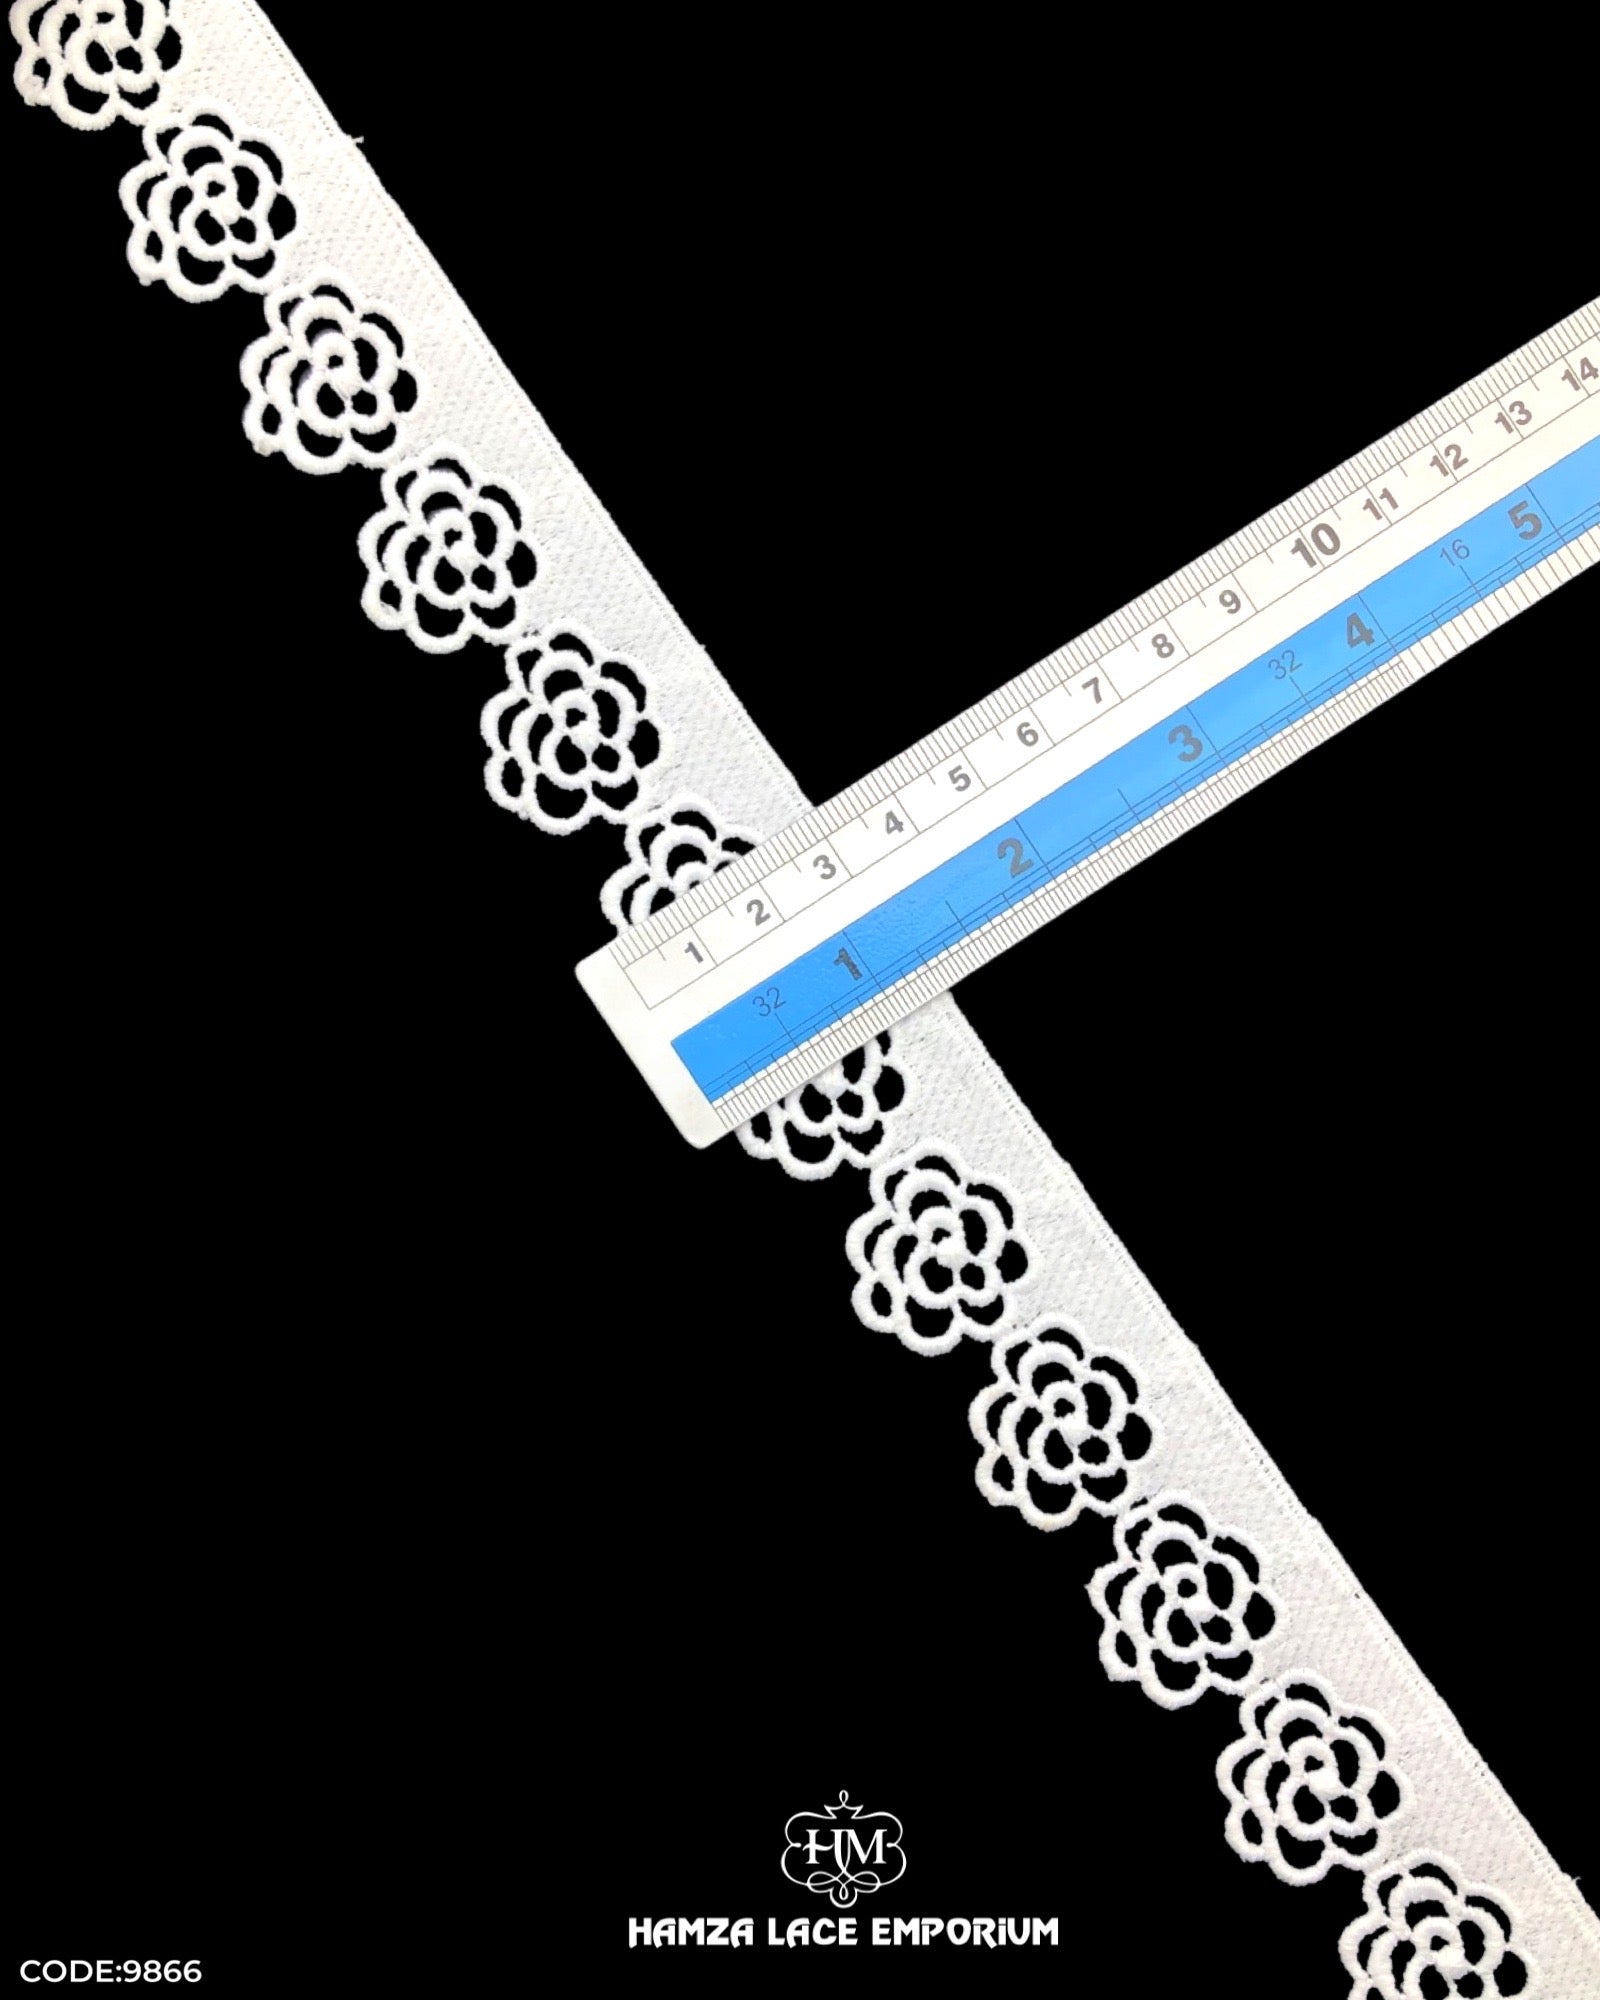 Size of the 'Edging Flower Design Lace 9866' is shown as '1.25' inches with the help of a ruler